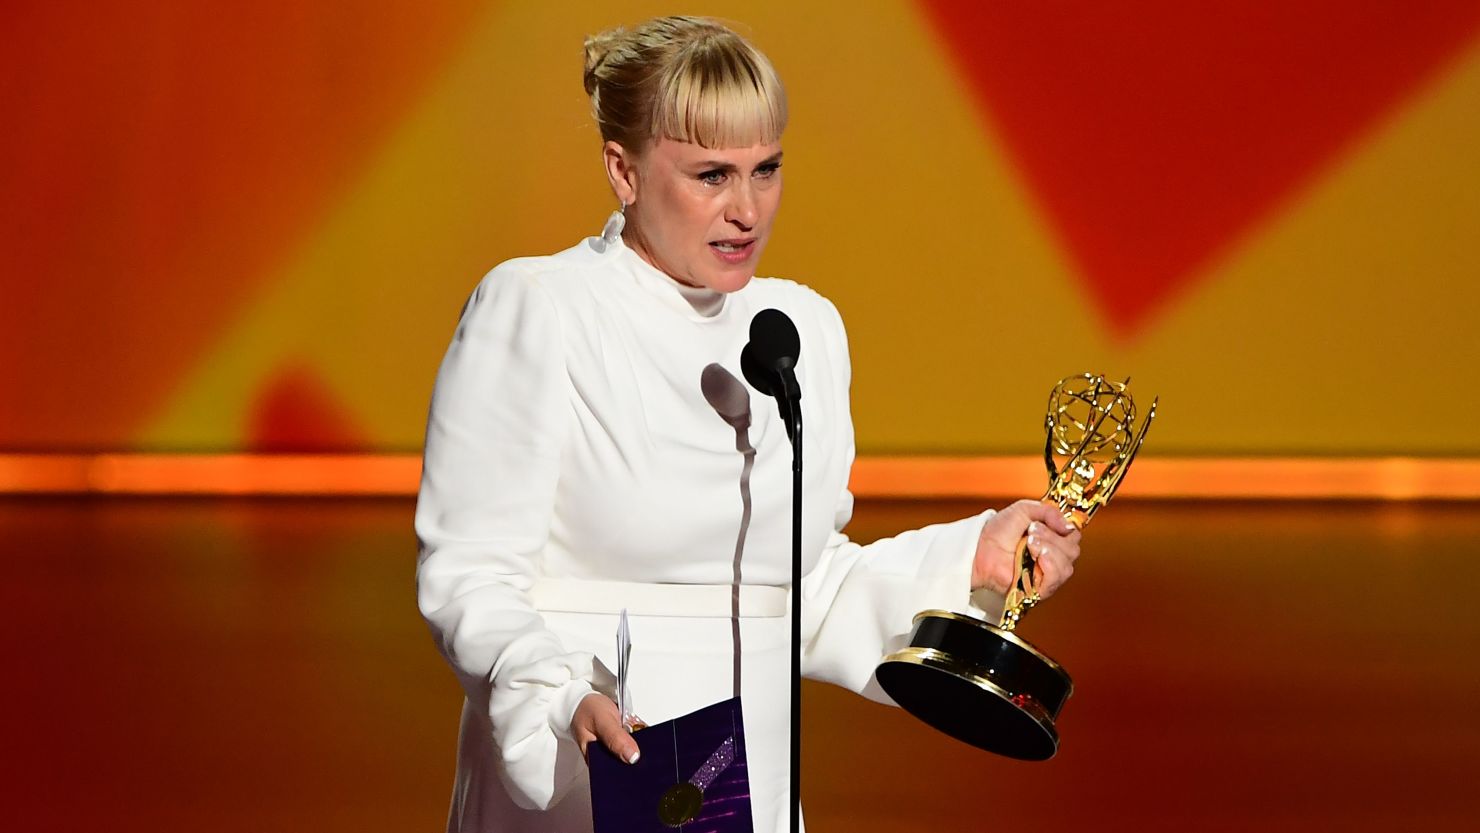 Patricia Arquette onstage during the 71st Emmy Awards in Los Angeles on September 22, 2019.